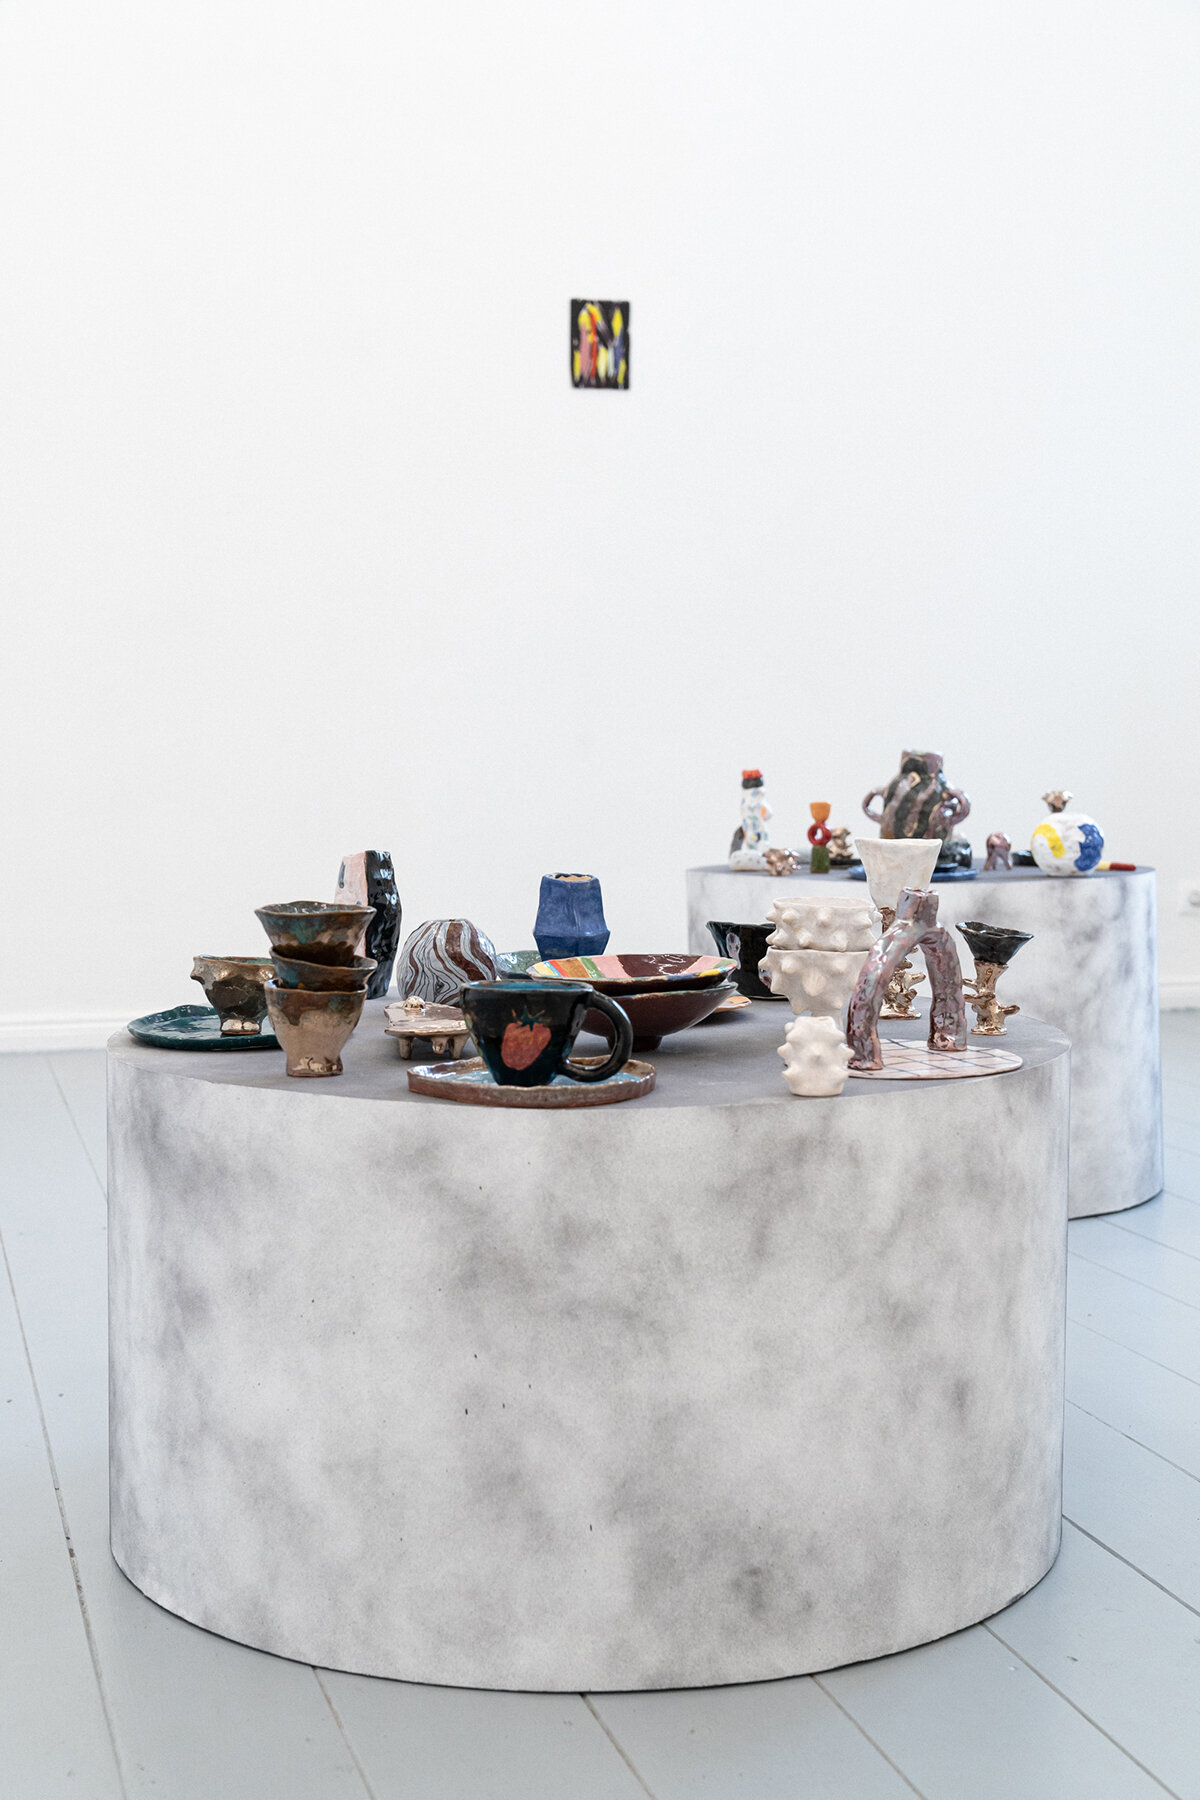 Satoko Kako, Daily Life Machine, ceramic installation on painted paper plinths (collaboration with Jessica Groome), dimensions variable, 2021